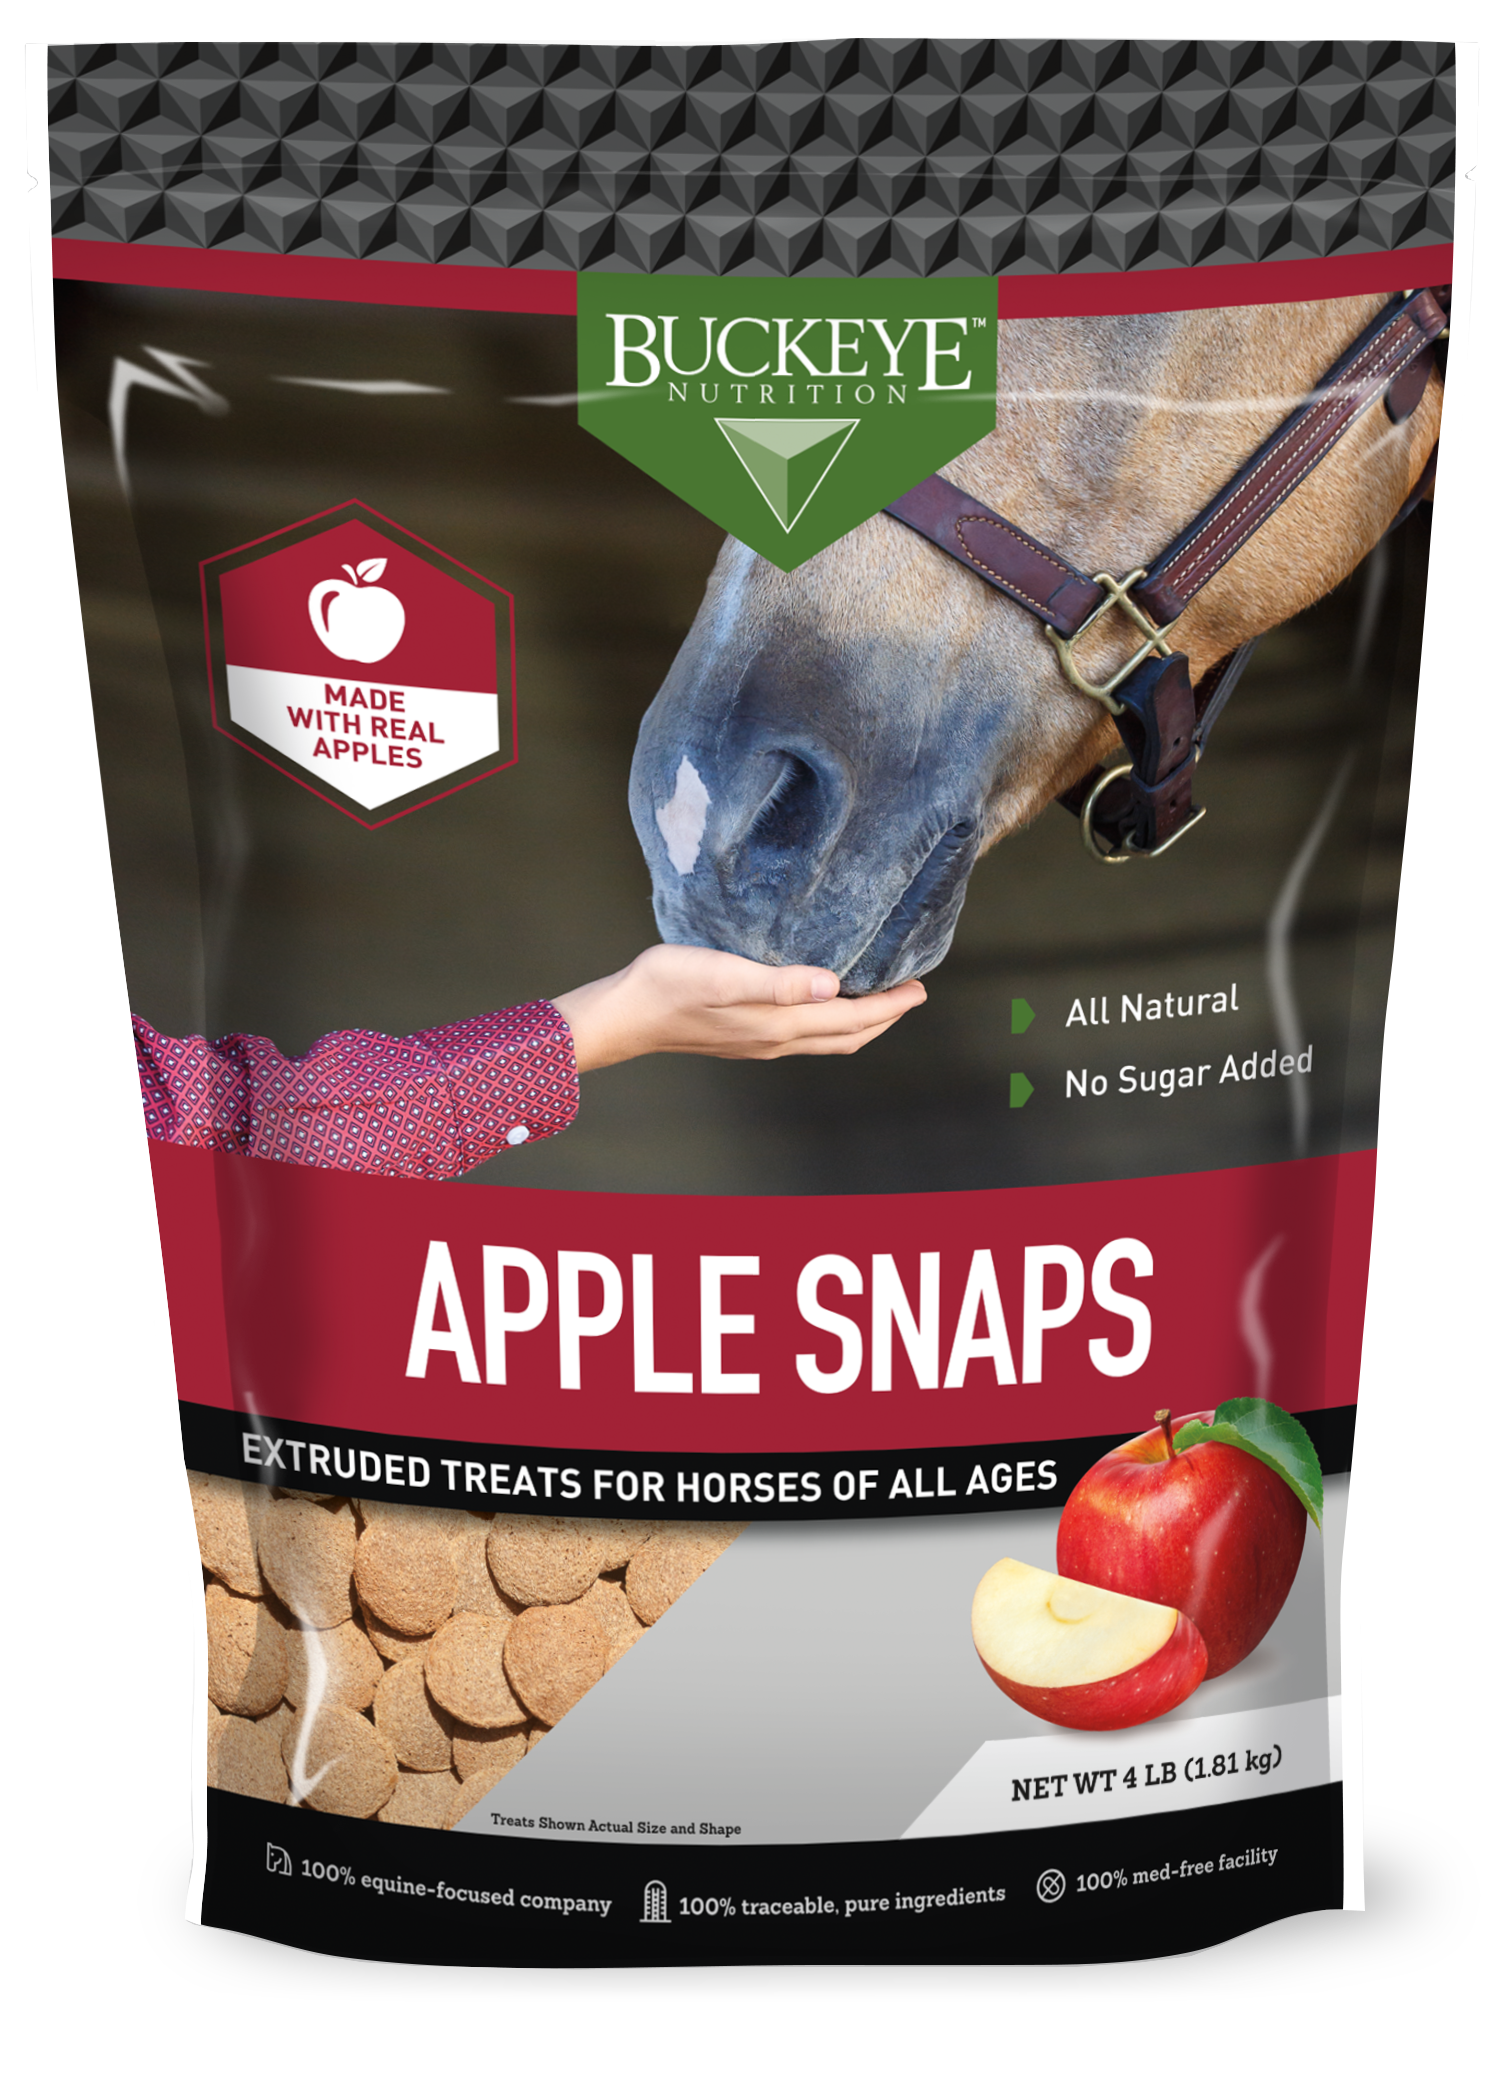 All Natural No Sugar Added Apple Snap Treats package